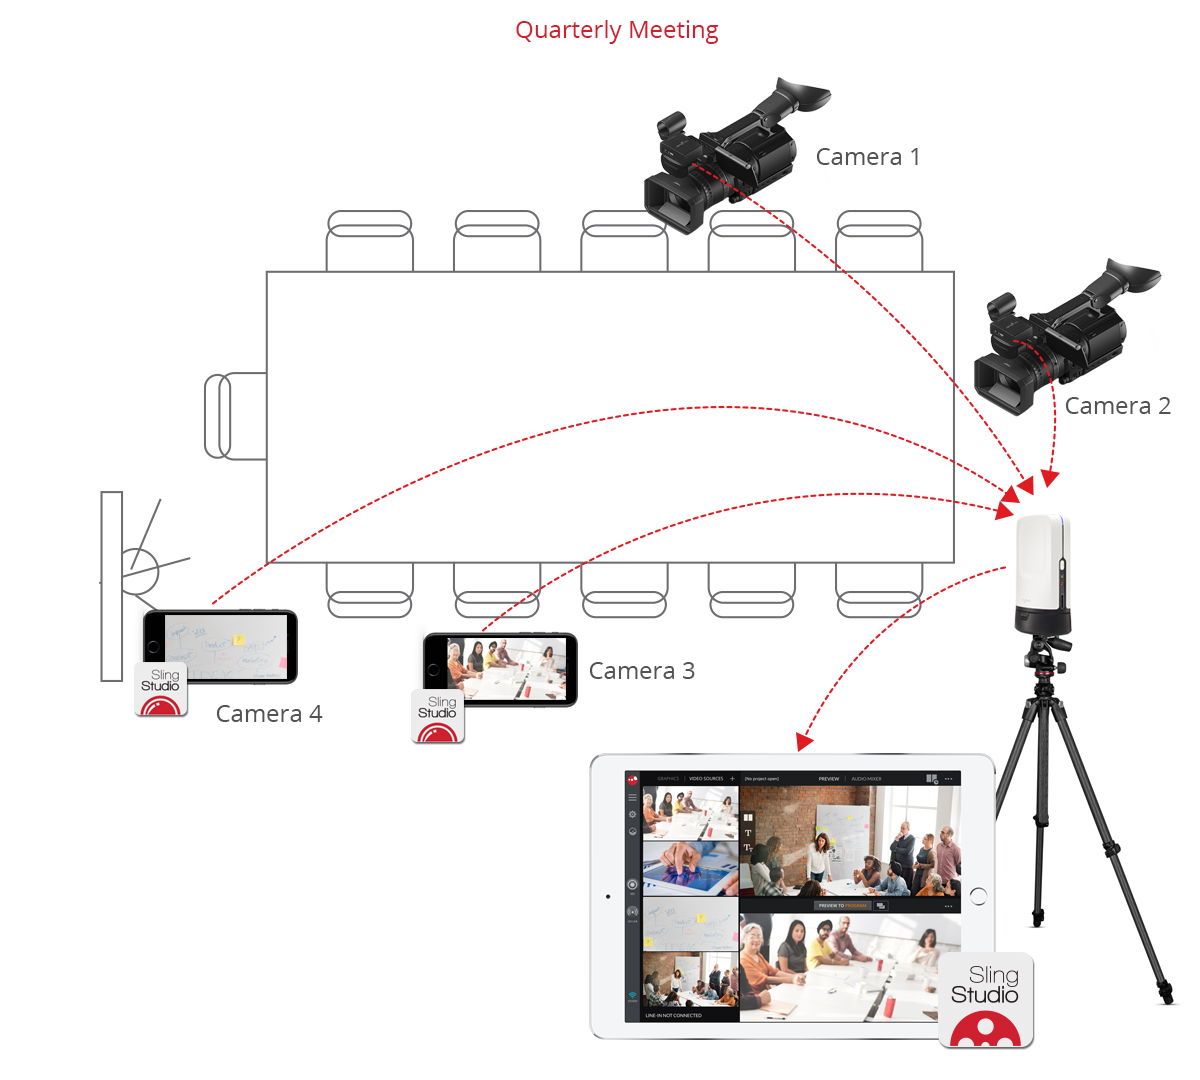 Diagram on how to live stream meetings and other corporate eventswith SlingStudio camera switcher